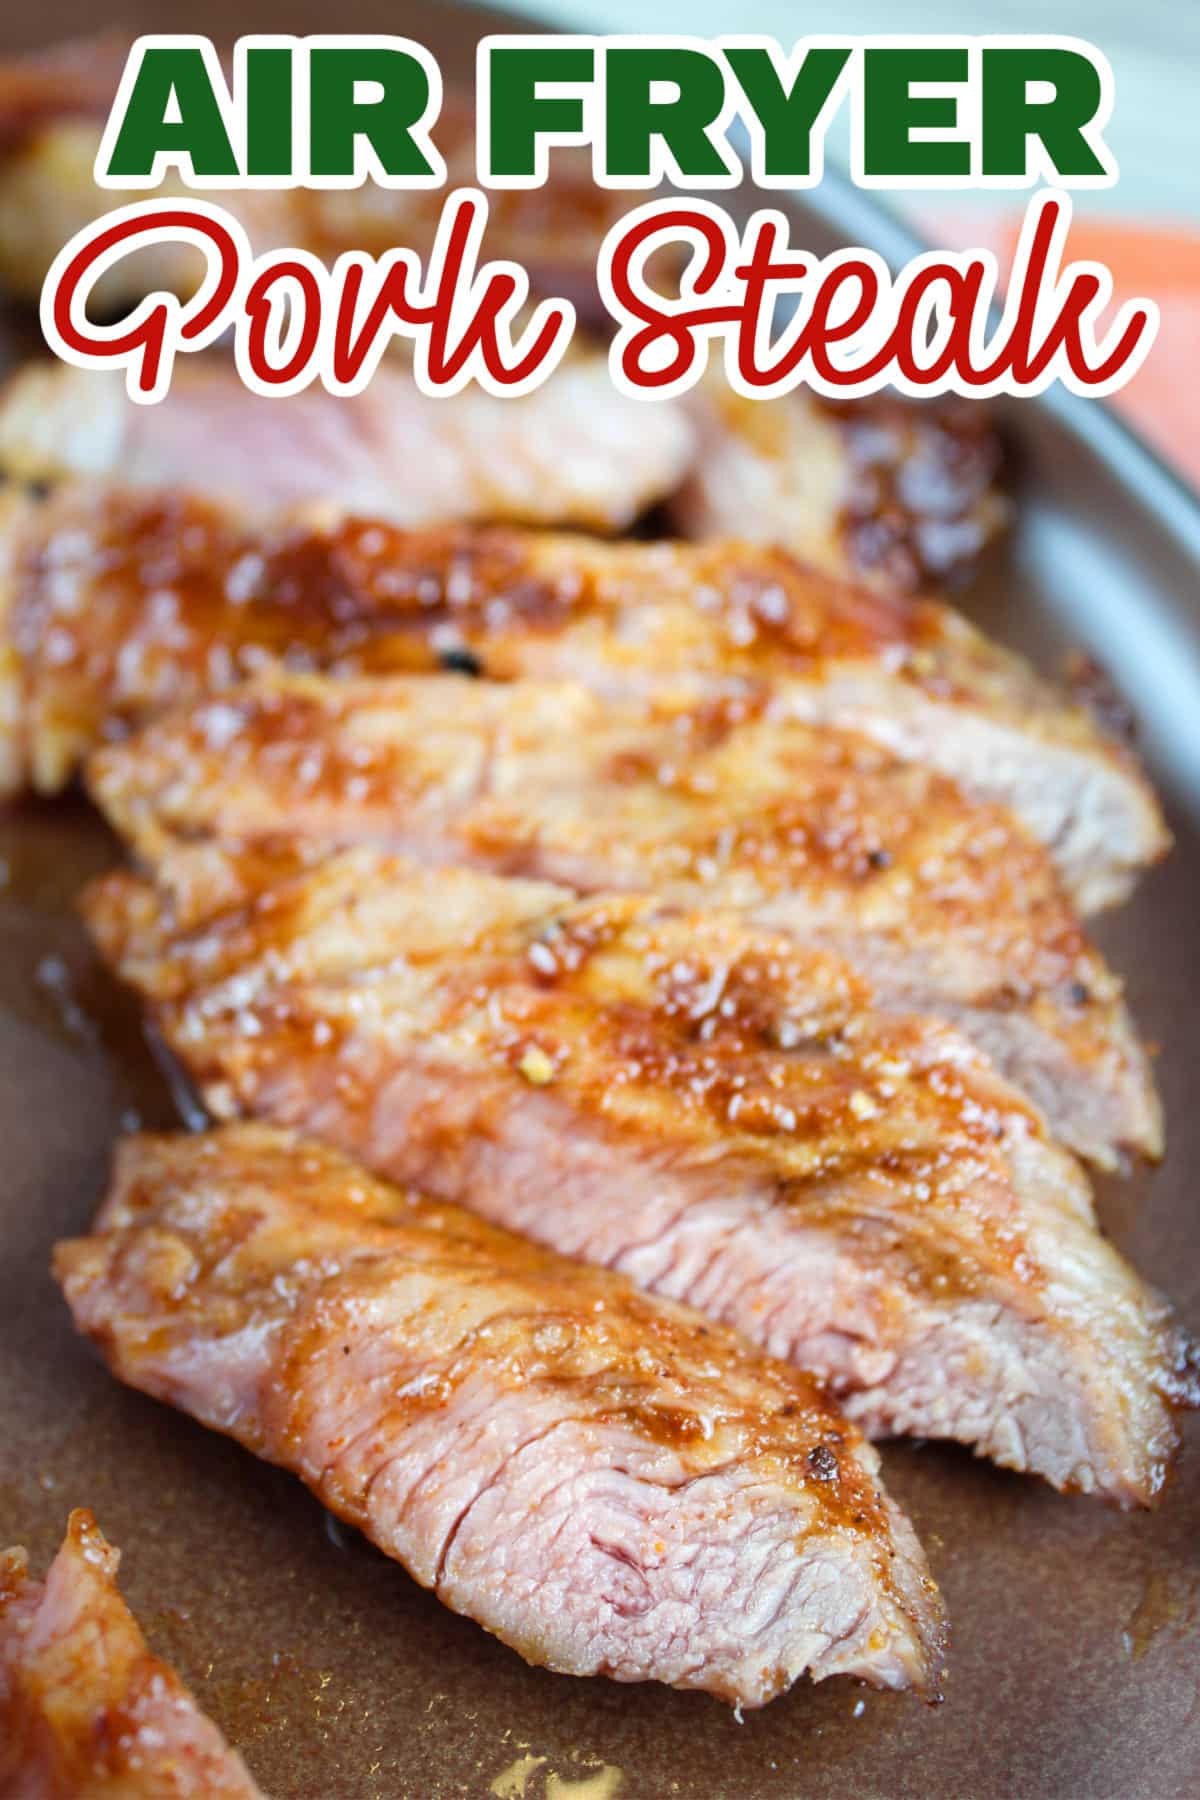 Pork Steak in the air fryer is not only a super quick supper - from fridge to table in just 15 minutes - it's also delicious and juicy! Pork steak is a little more forgiving than a boneless pork chop so it's tender every time. Add a little bbq seasoning and you're done! via @foodhussy